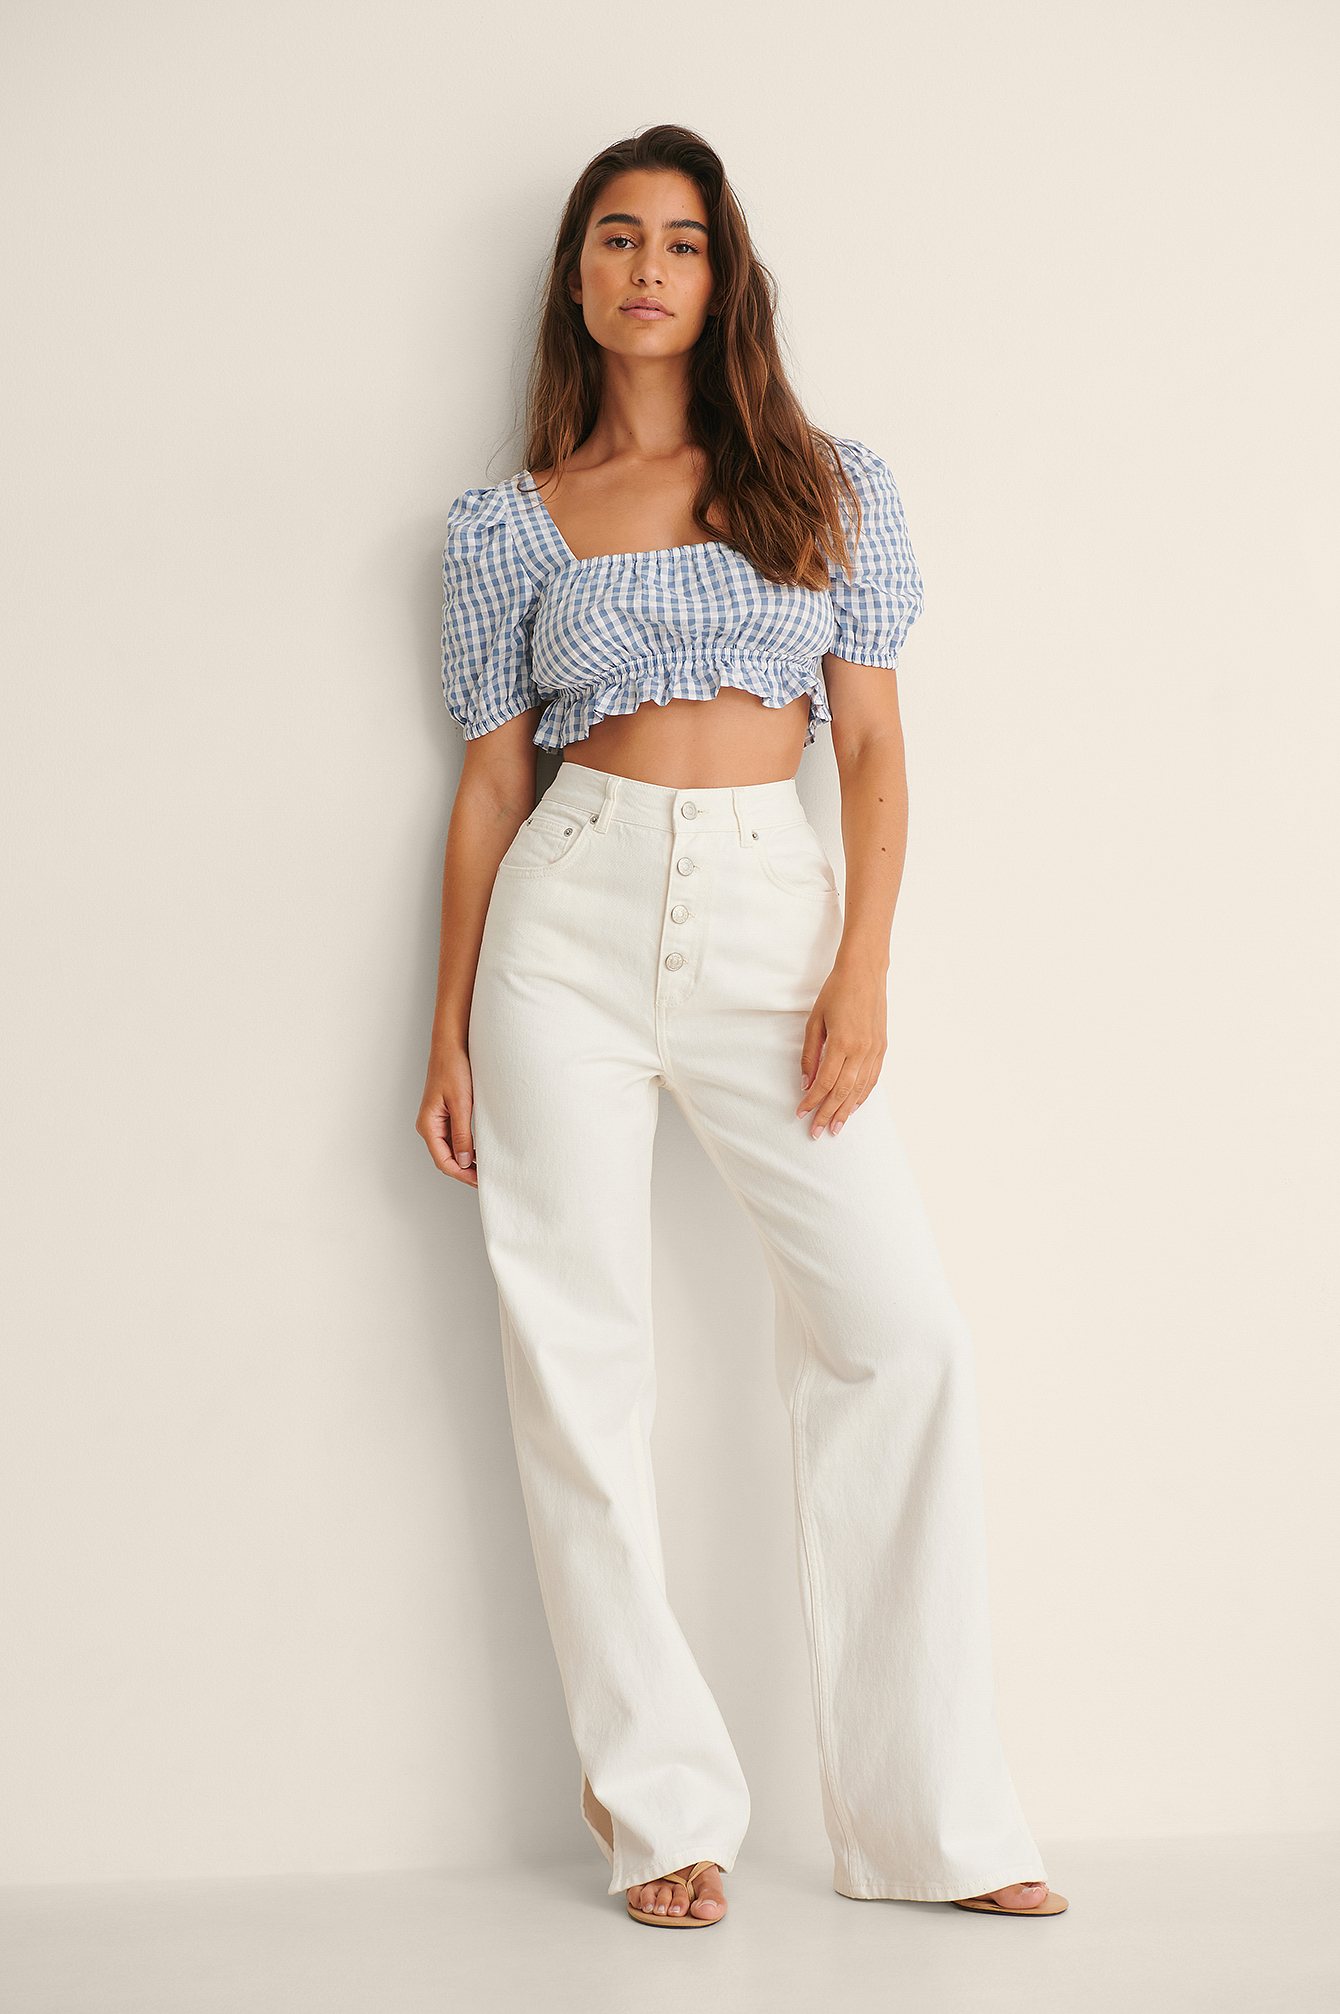 Blue/White Gingham Cropped Top